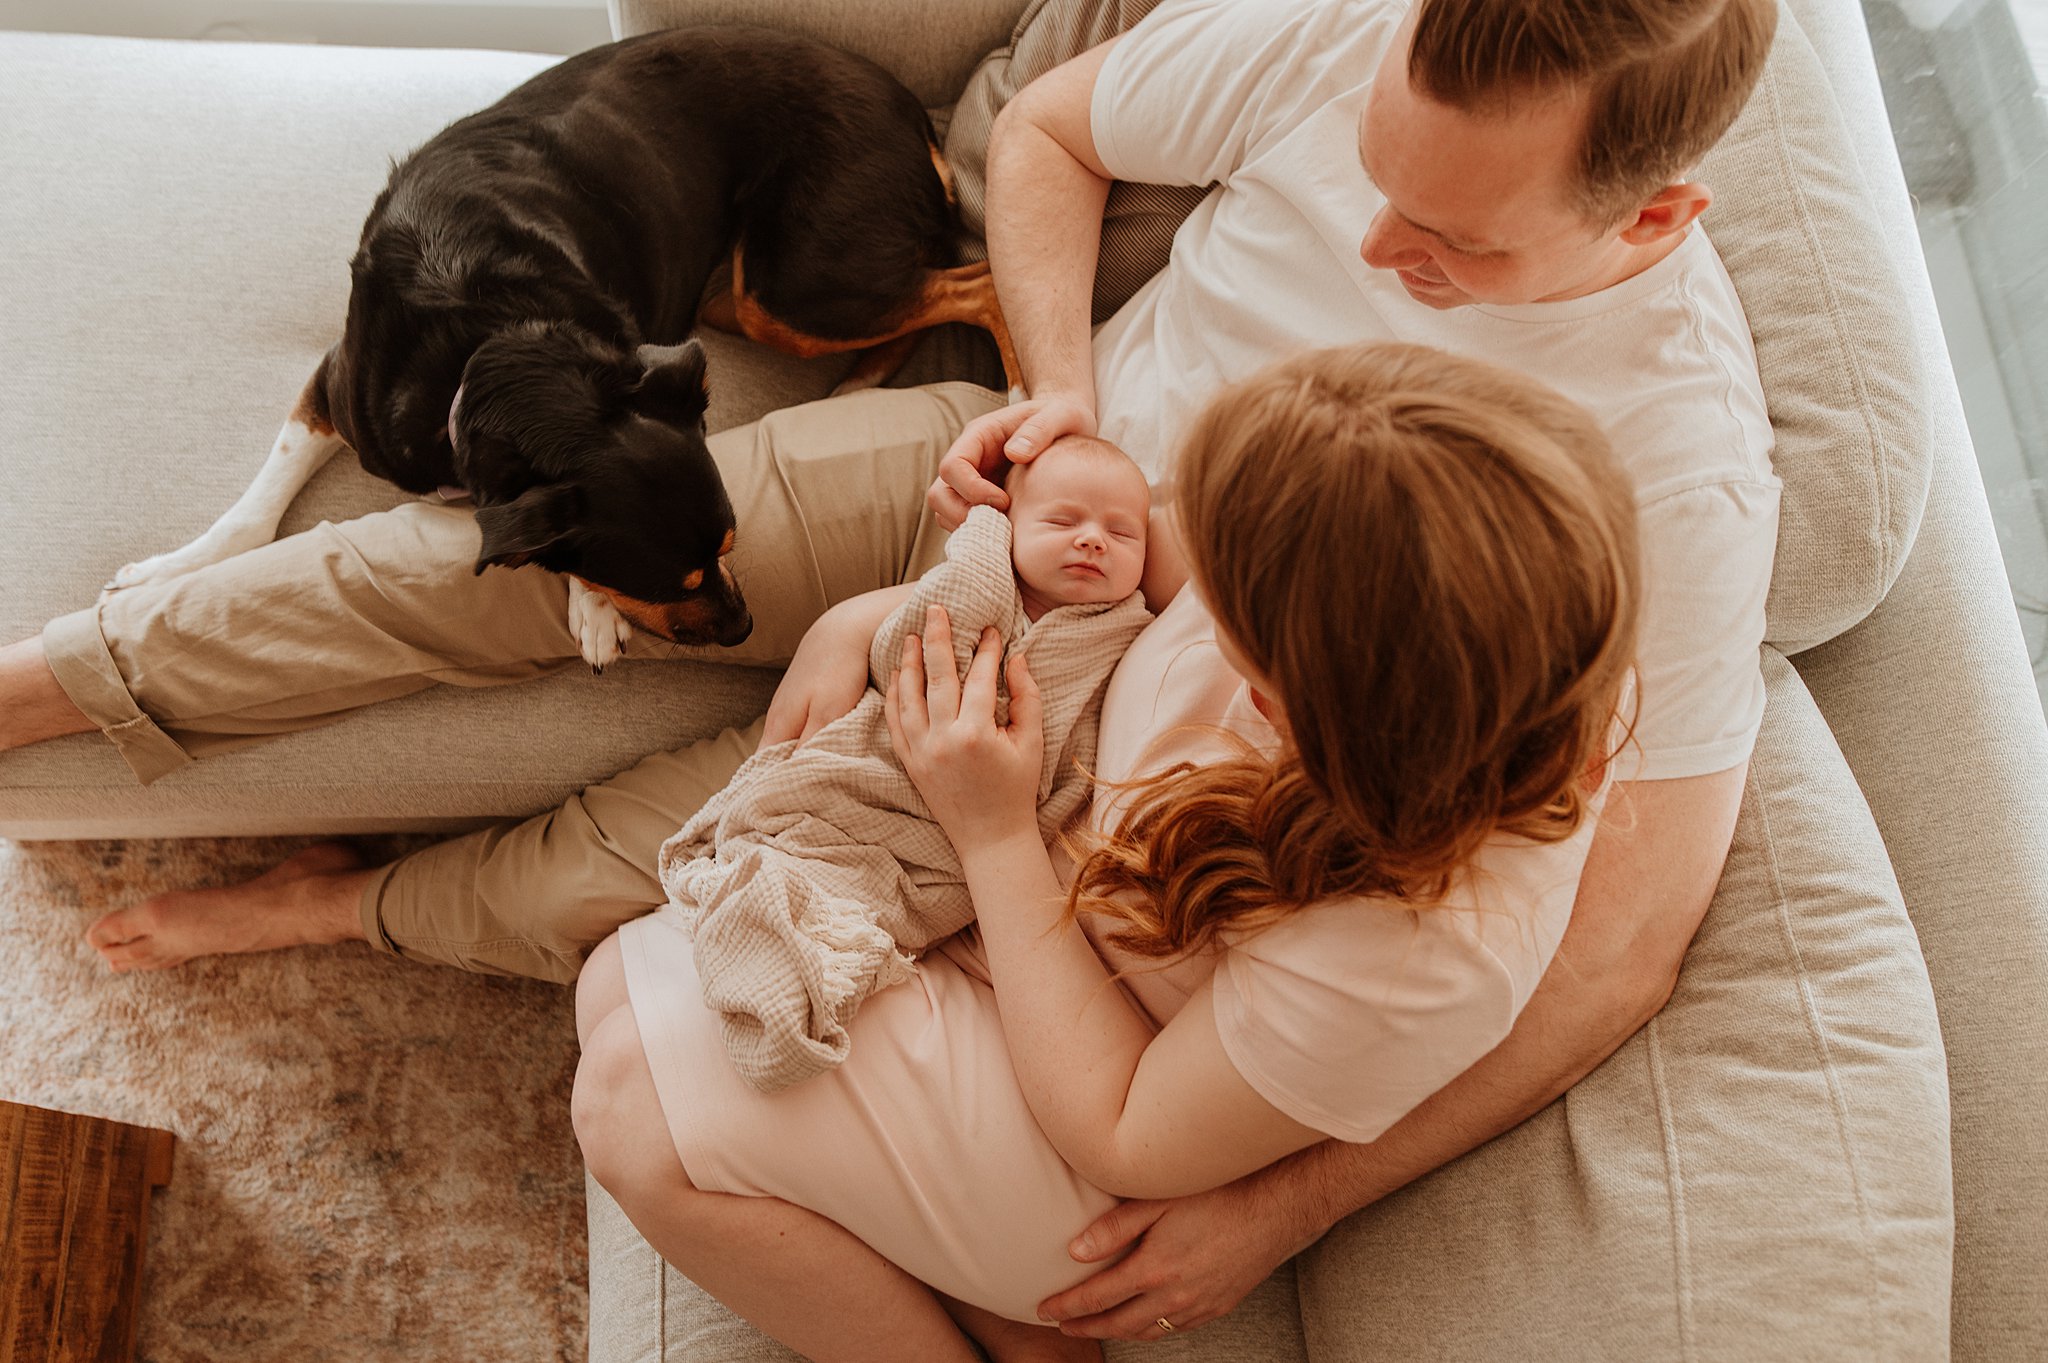 A mom and dad sit together on a couch with their dog while cradling their newborn baby in their lap